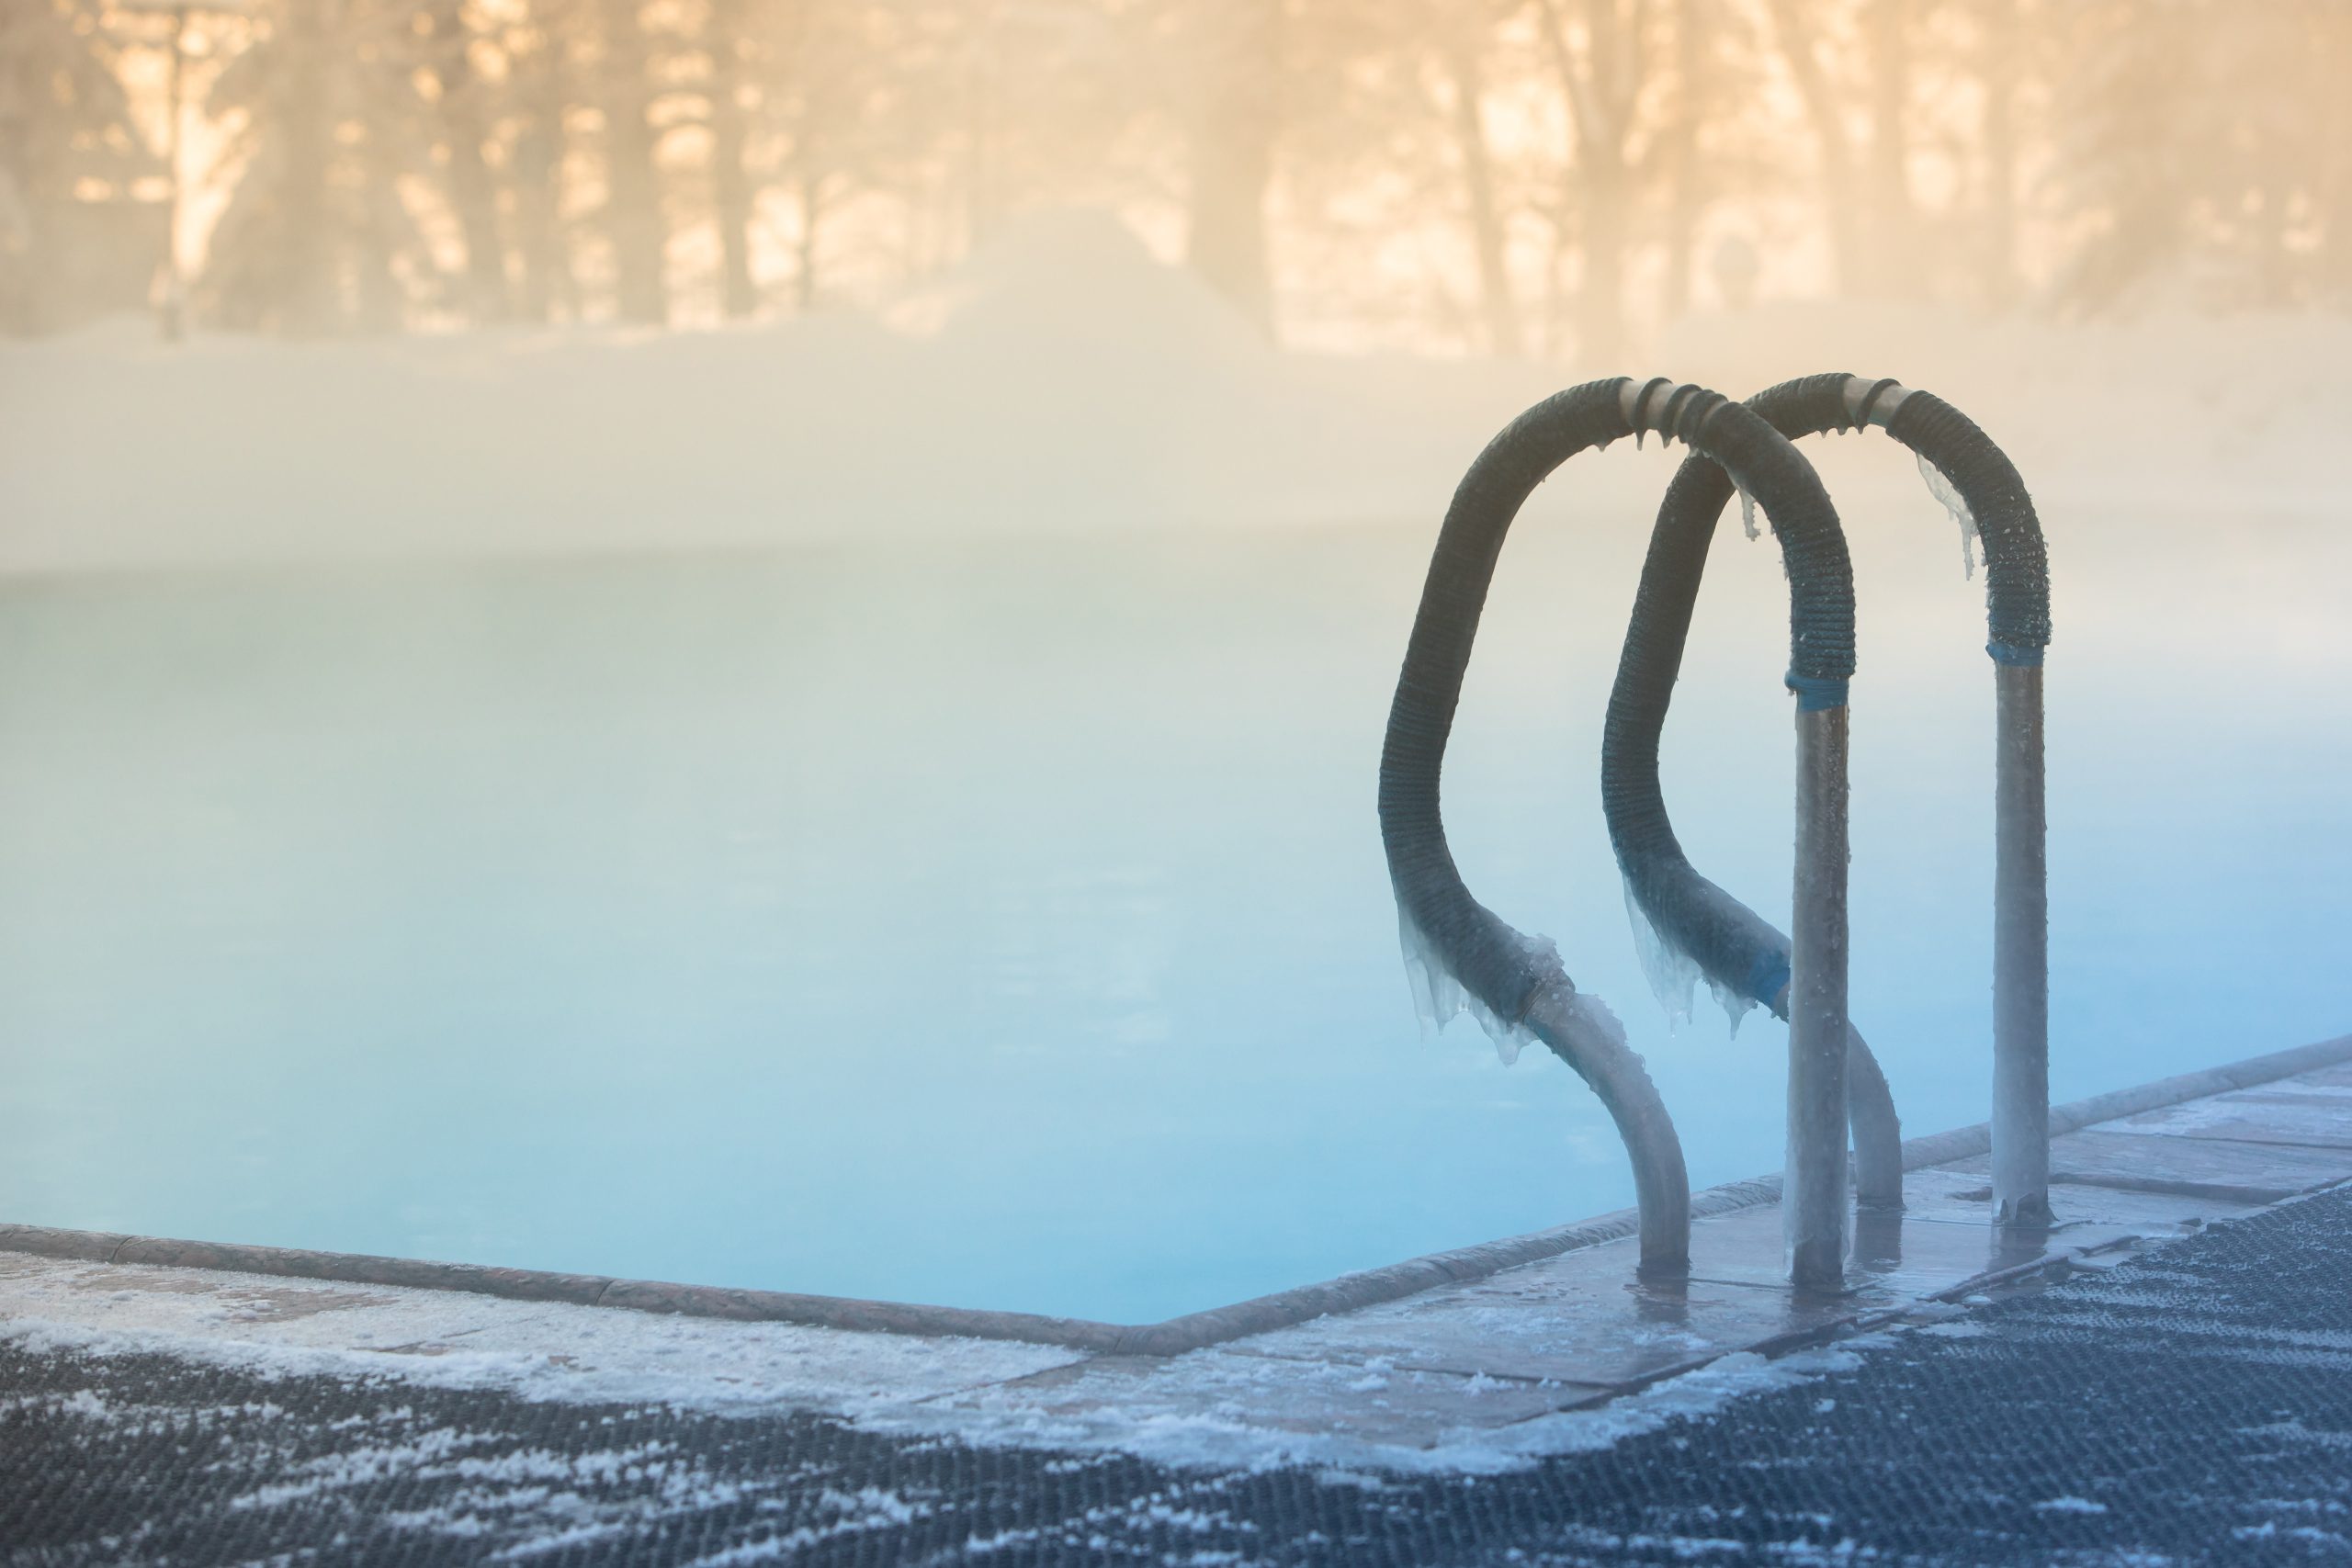 warm-swimming-pool-hand-rail-in-frosty-weather-out-2021-10-13-01-31-47-utc-scaled